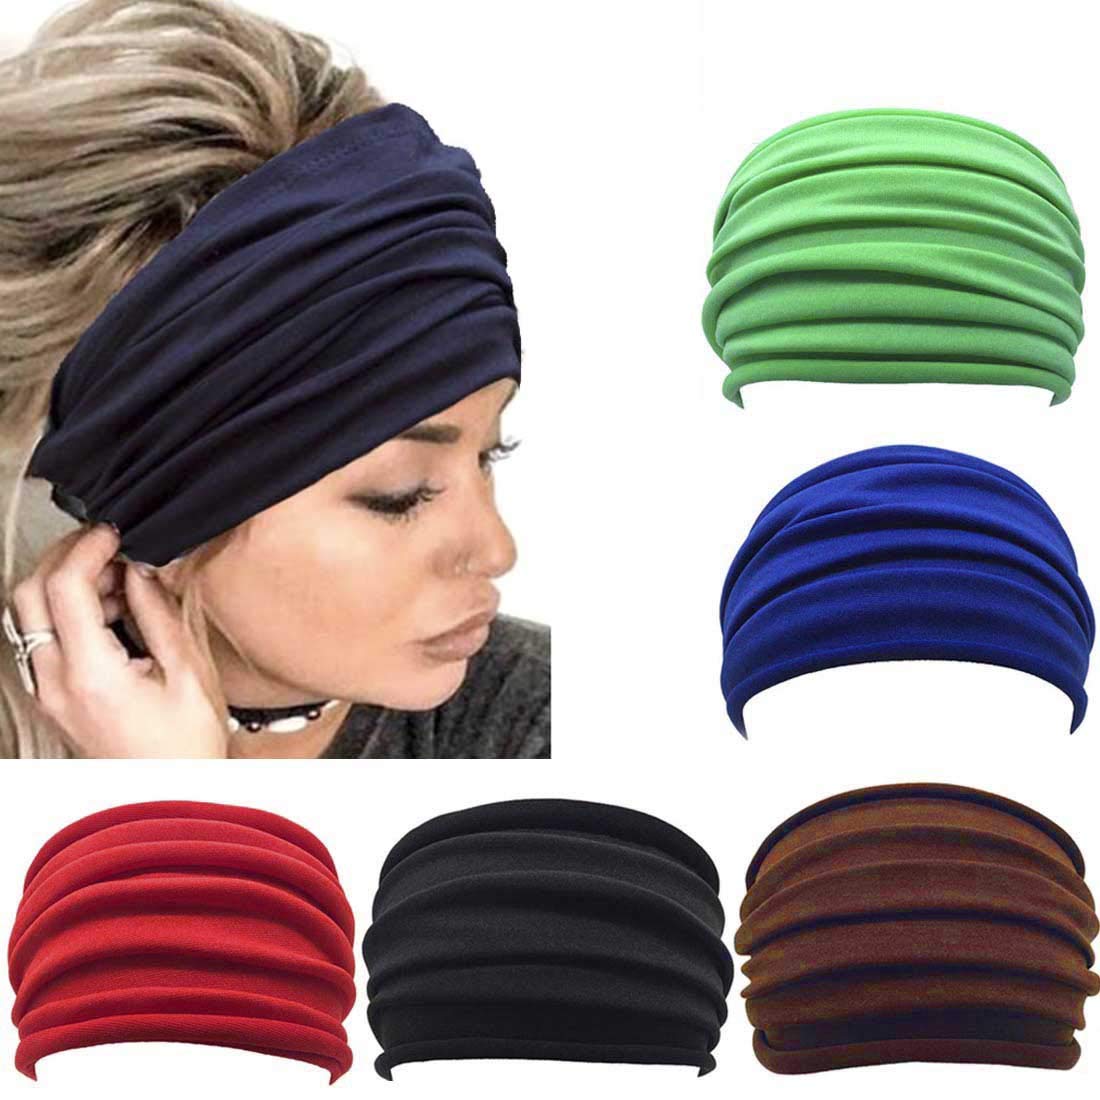 Turbans With Band For Women, Hair Wraps